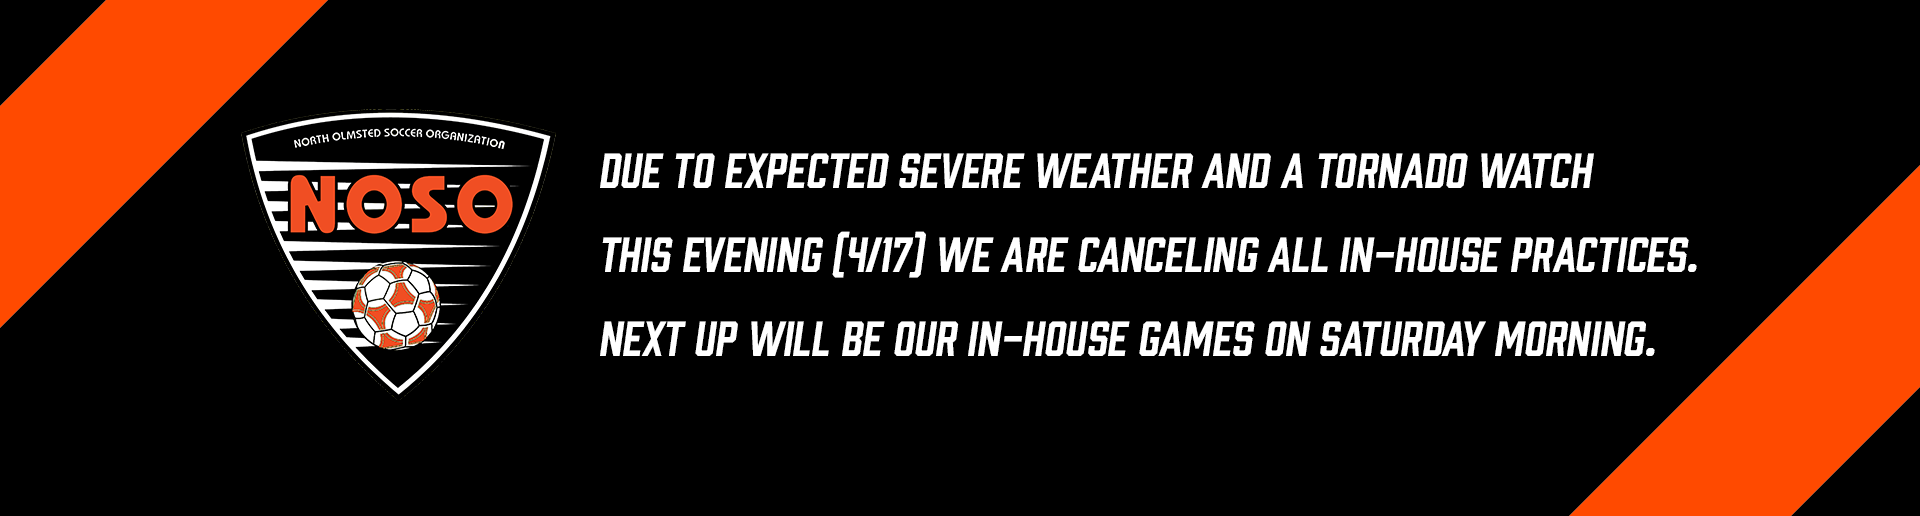 In-House CANCELLED tonight (4/17)